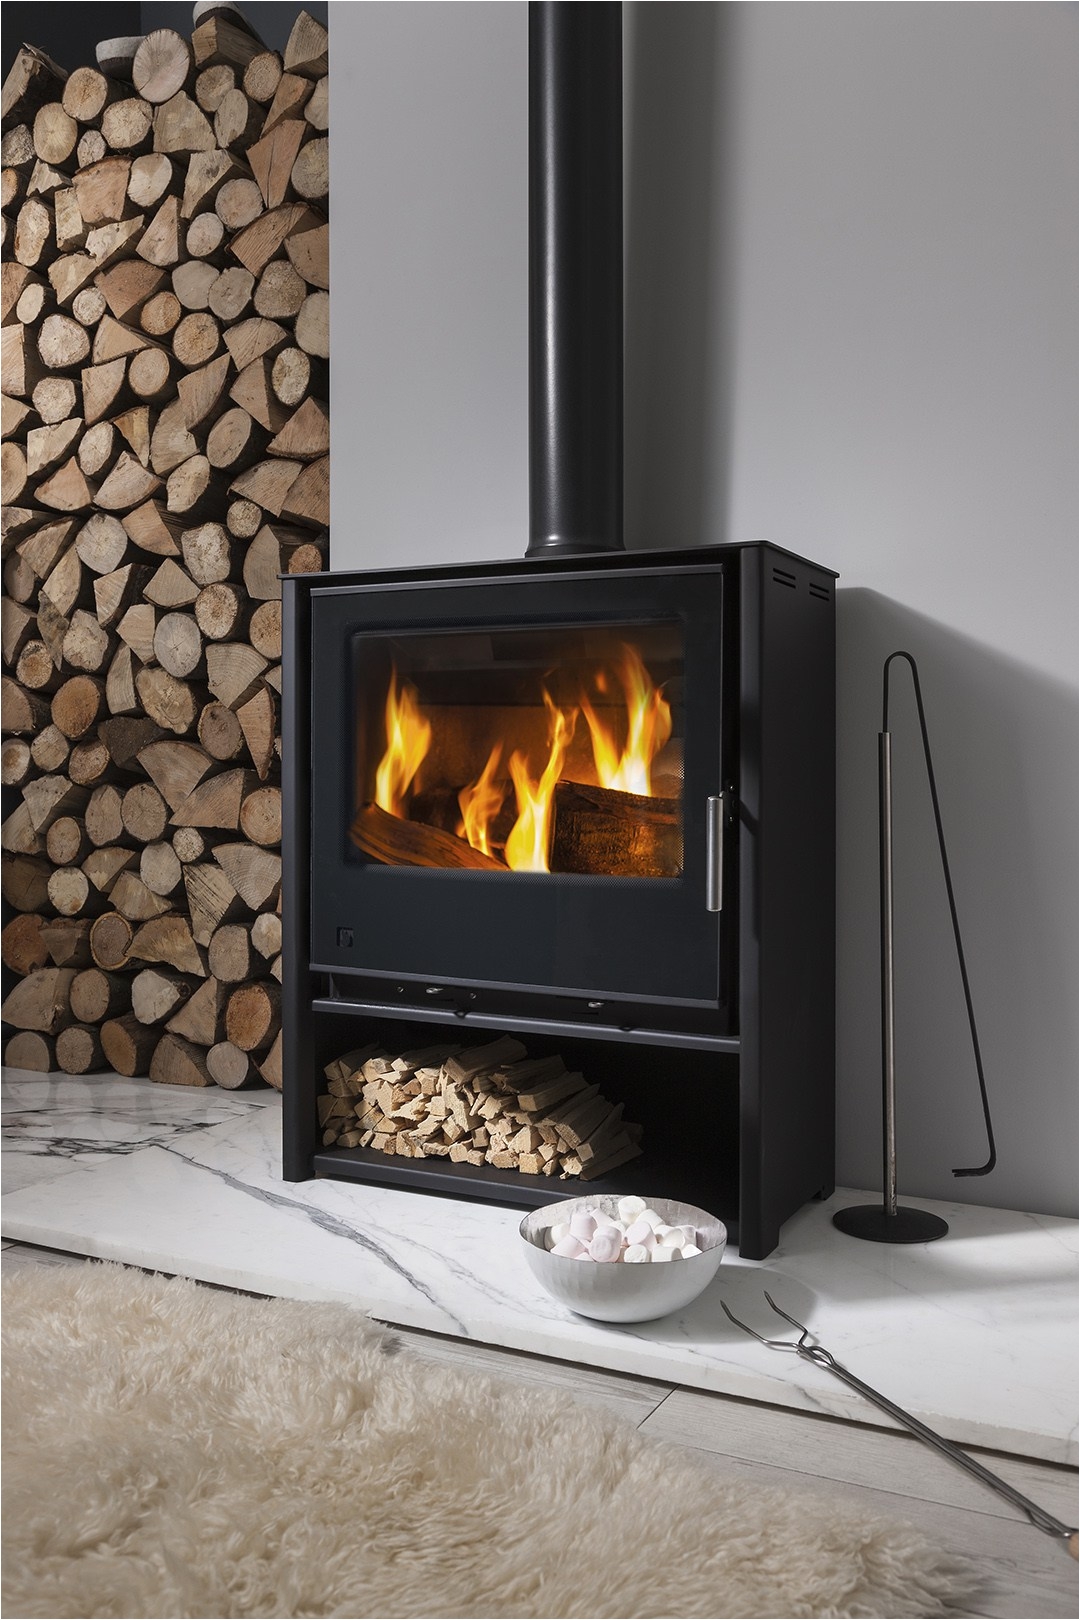 interior appealing contemporary wood burning fireplace stoves 5kw ideas stove insert ireland double sided designs